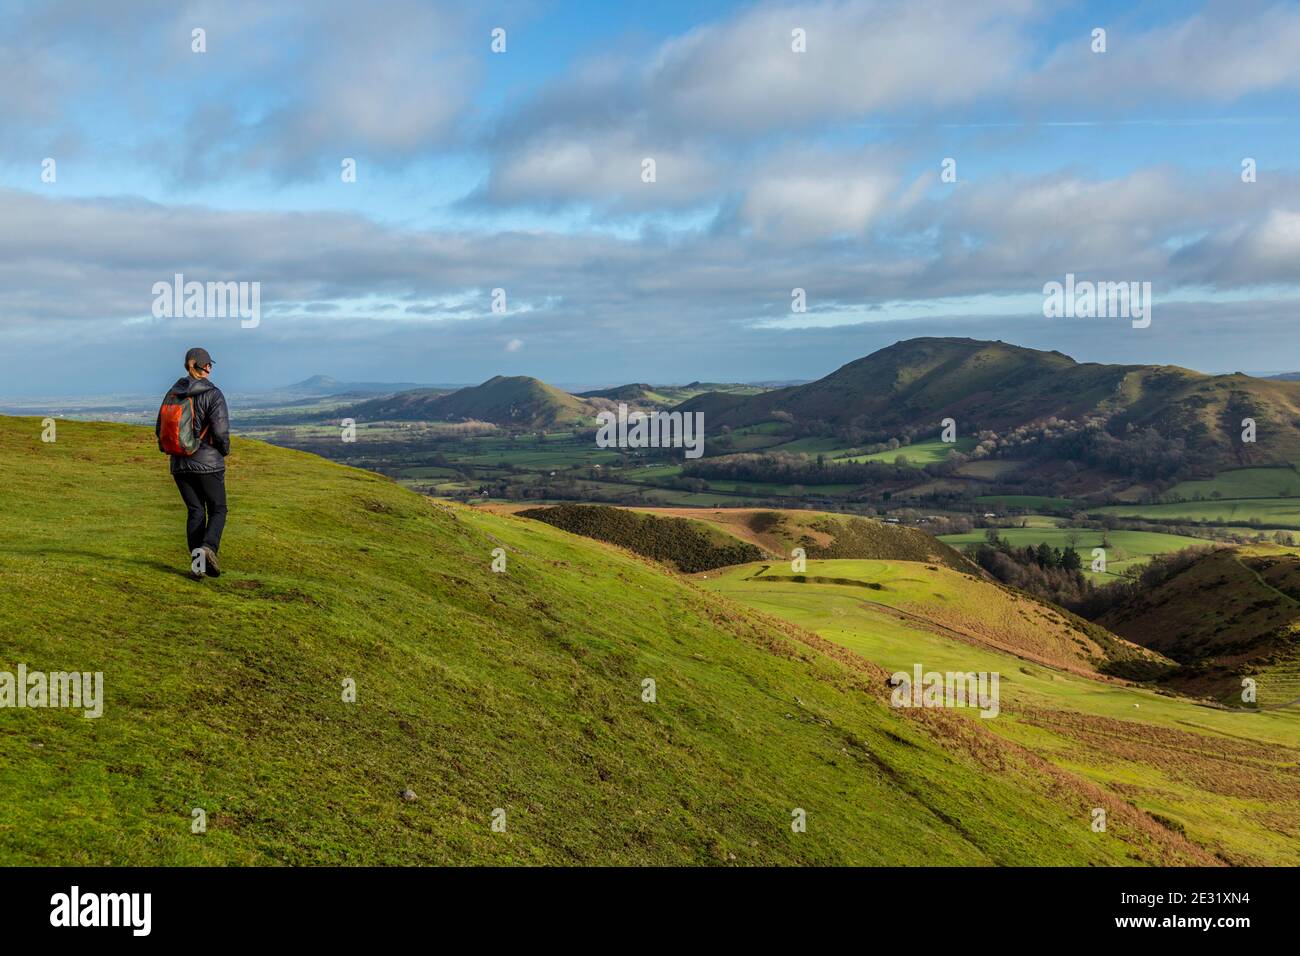 Solo female hiker on the Long Mynd, Shropshire, England, with Caer Caradoc, The Lawley, with The Wrekin in the distance. Stock Photo